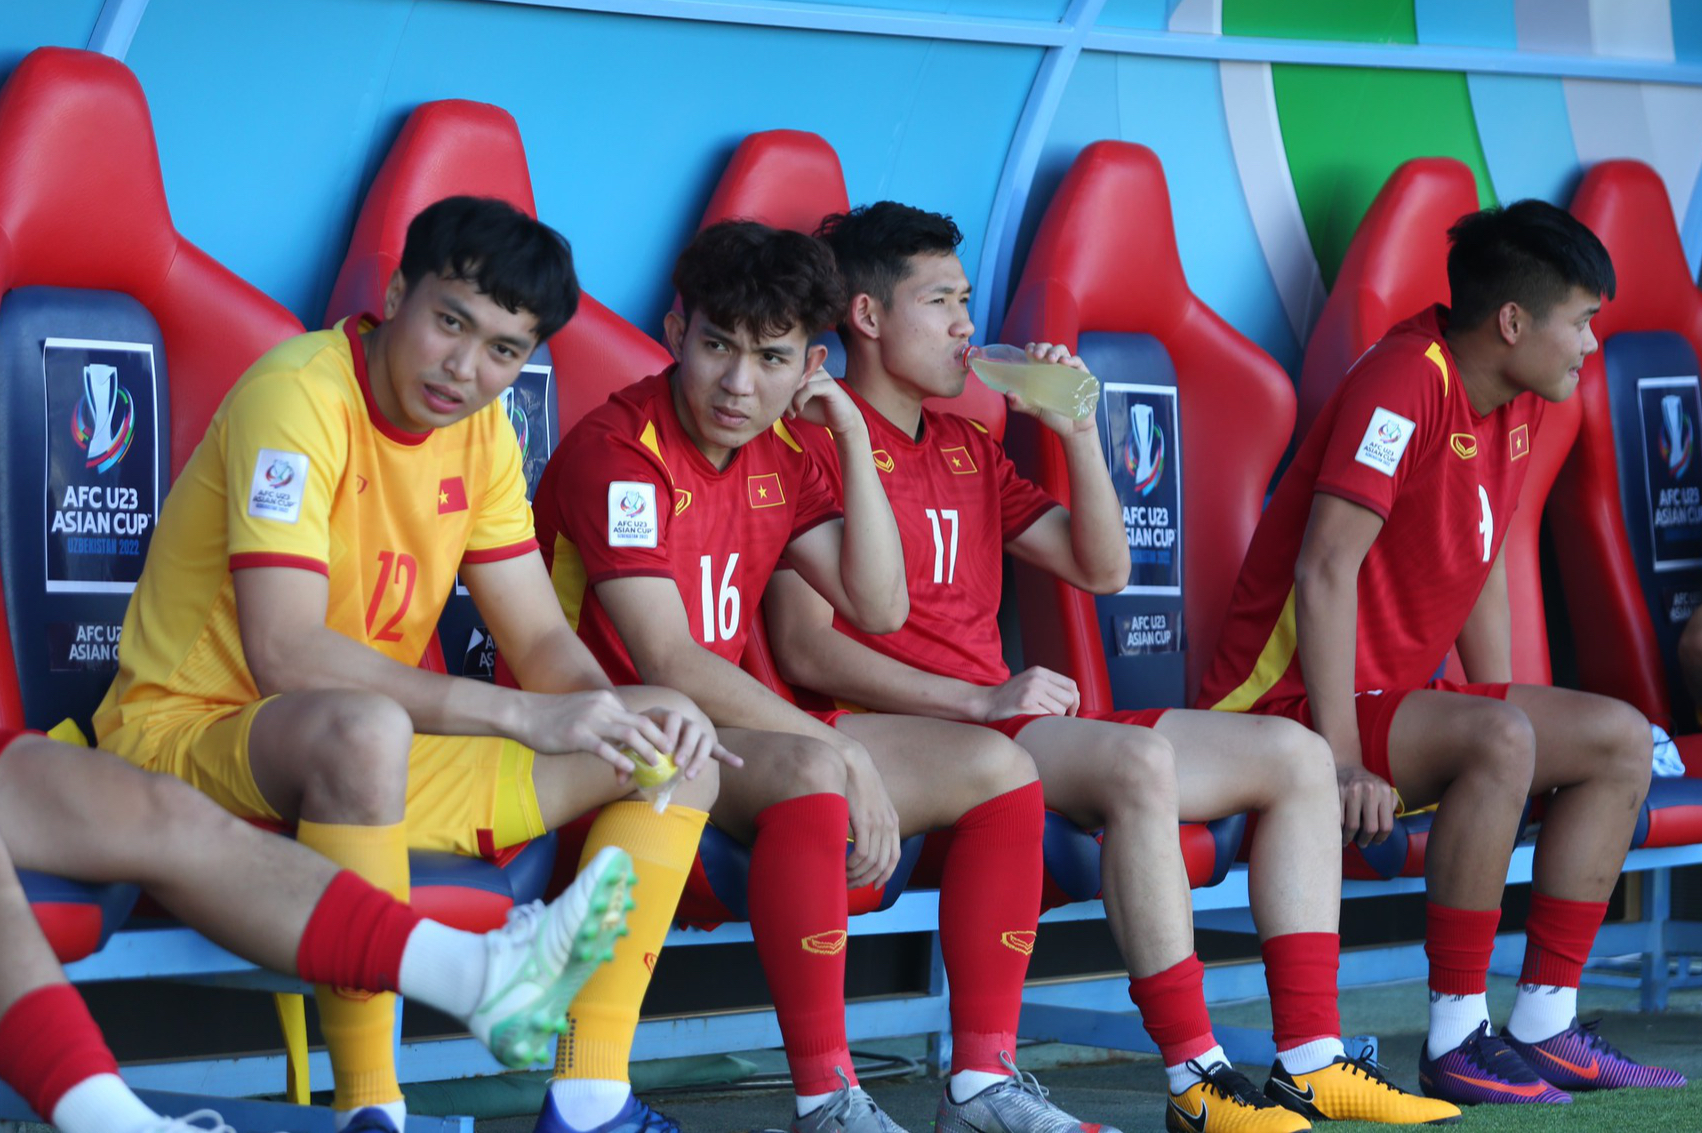 Van Toan sat contemplatively looking at his teammates, Dung Quang Nho recharged before U23 Vietnam played - Photo 6.